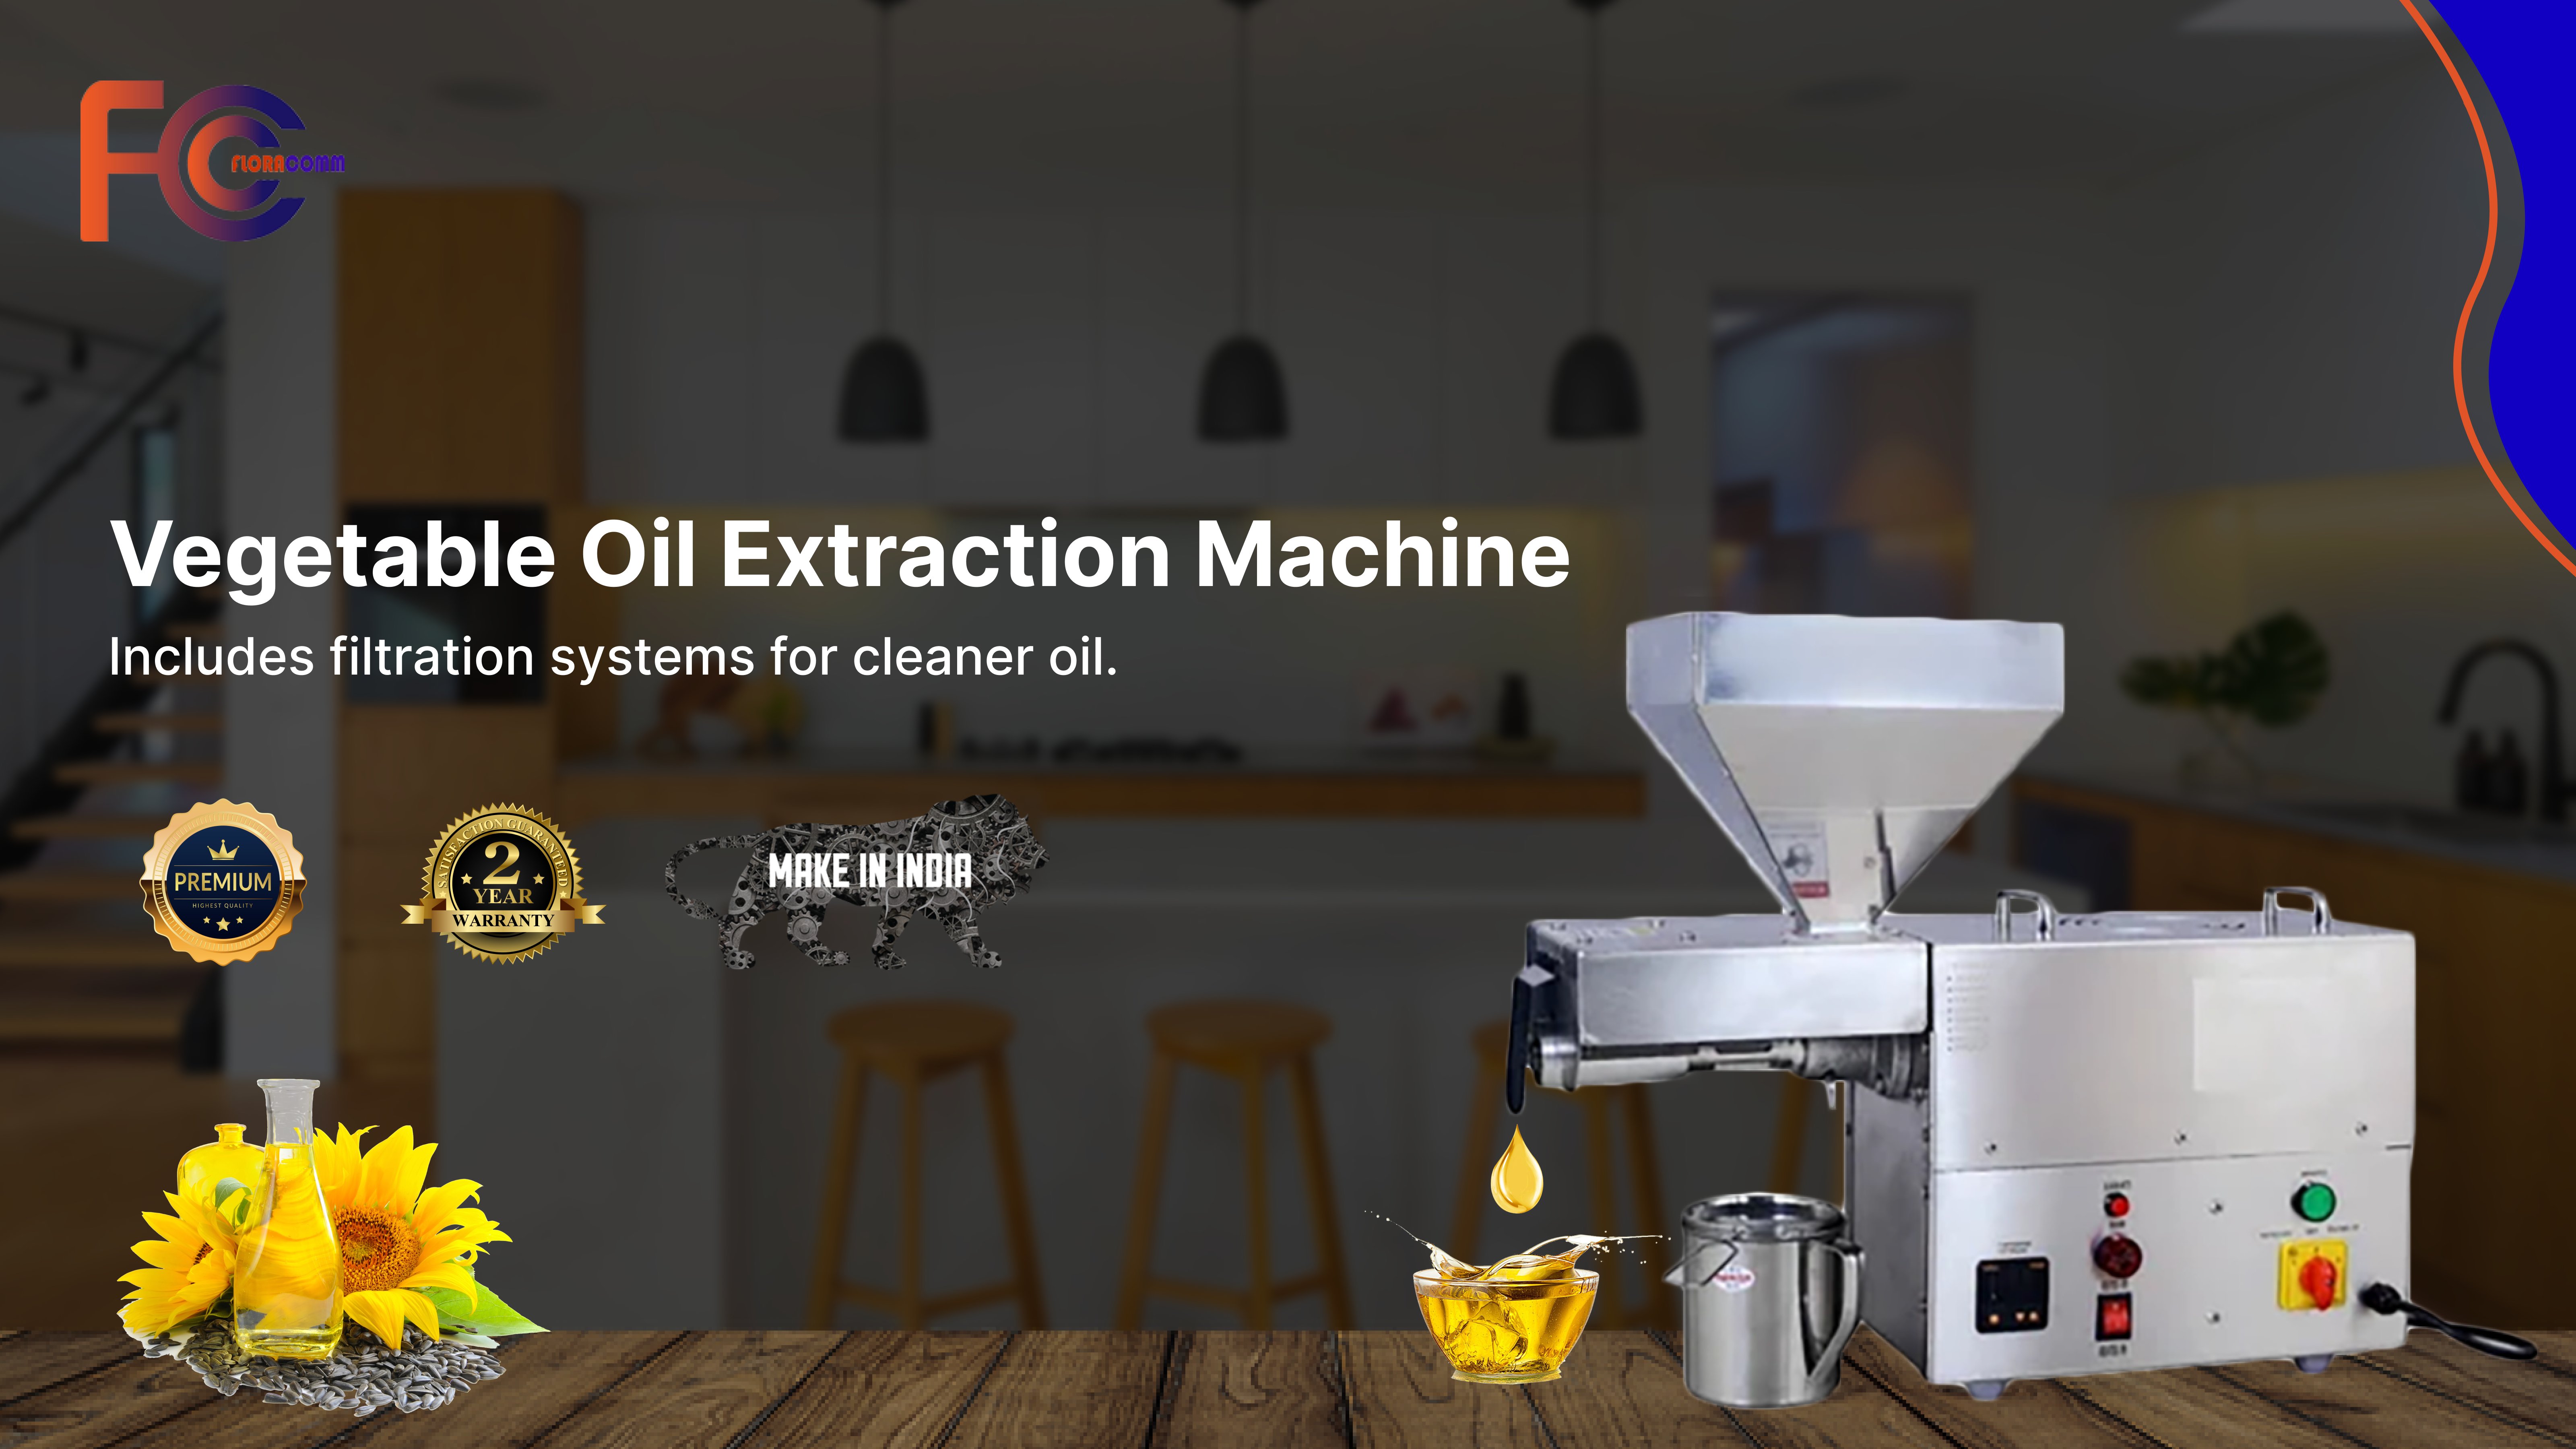 Essential Factors to Consider Before Buying a Vegetable Oil Extraction Machine